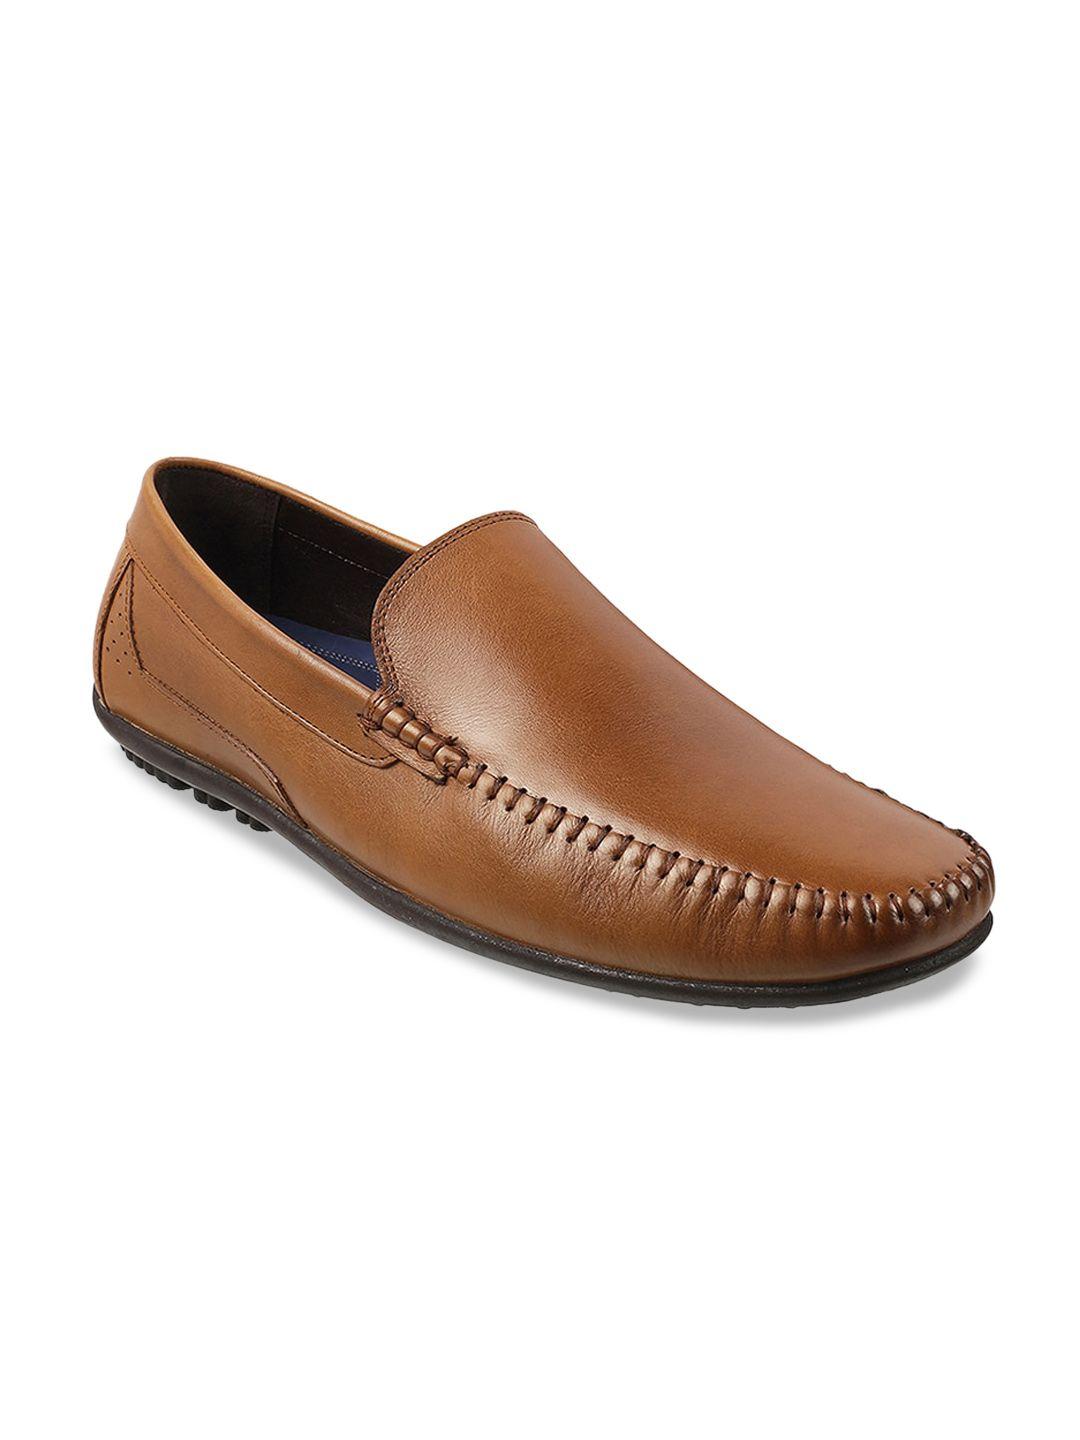 metro-men-tan-solid-leather-loafers